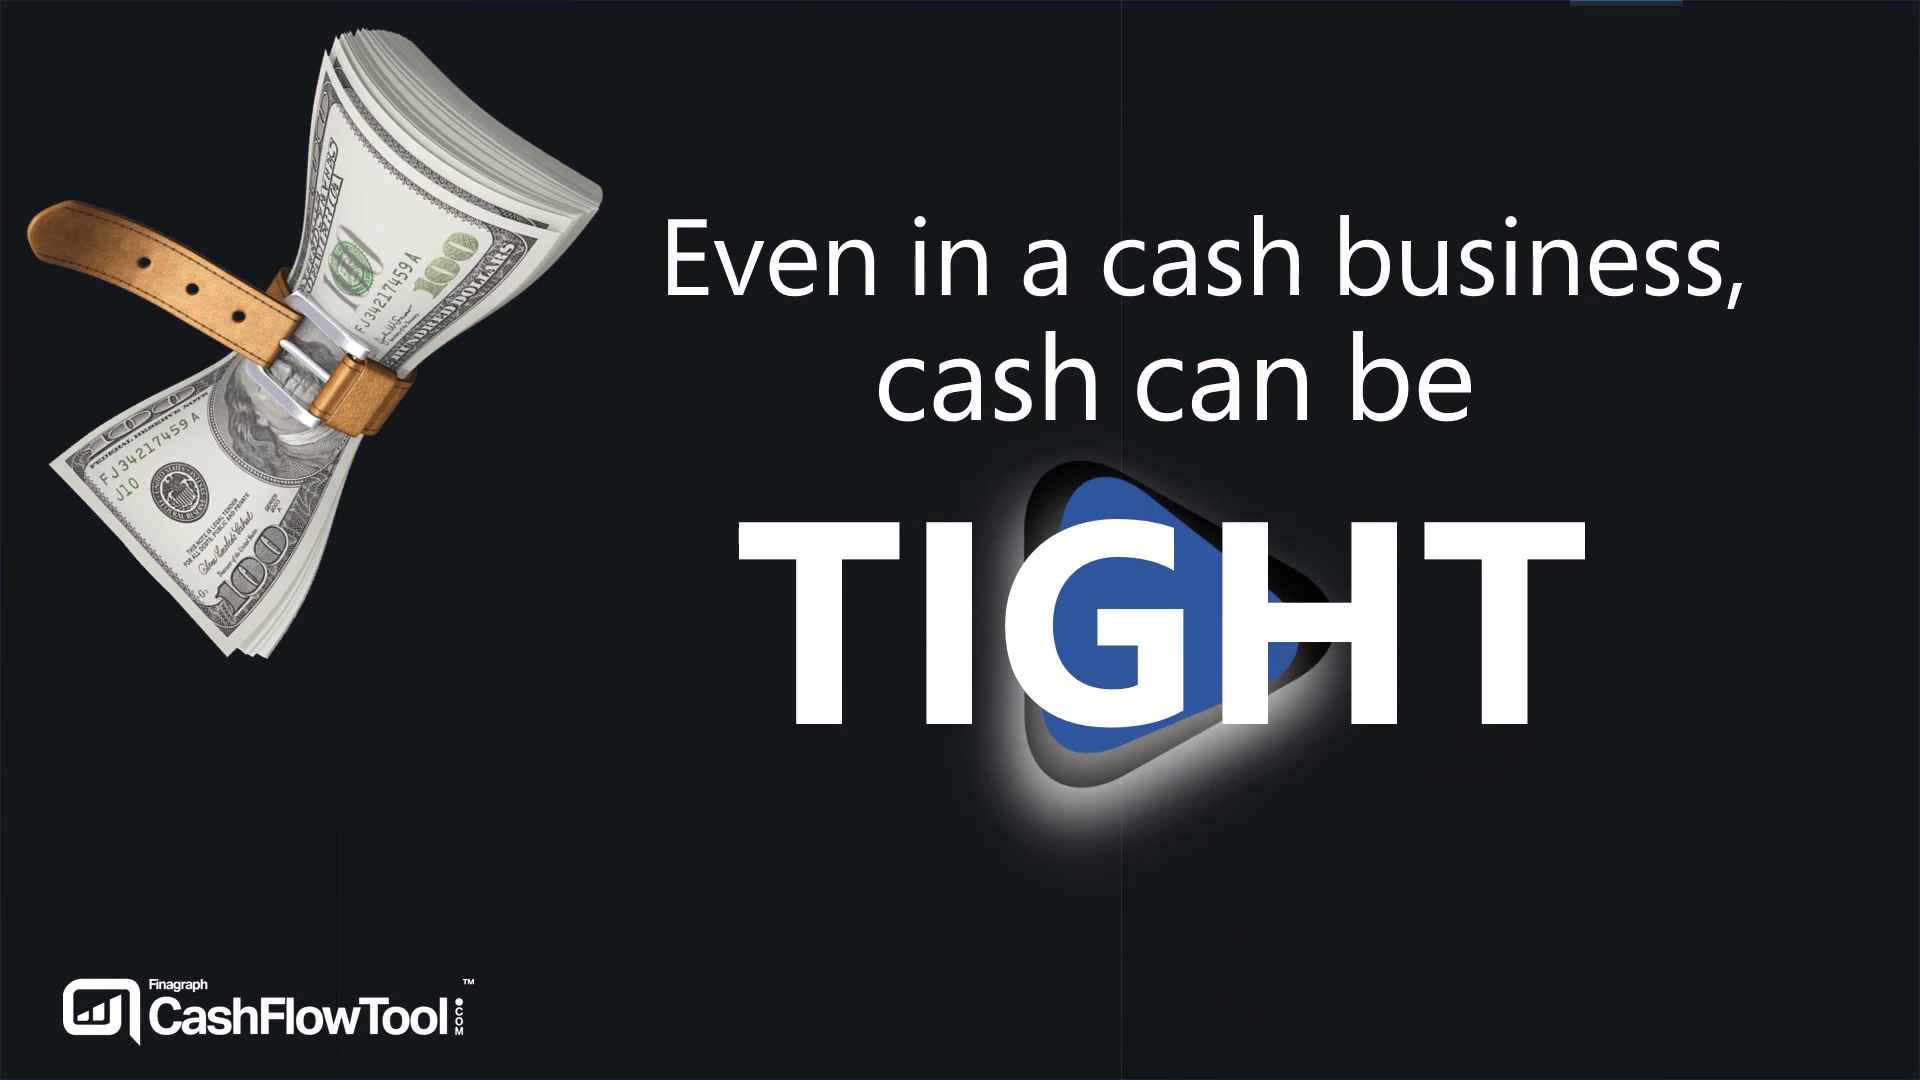 Even in a cash business, cash can be tight